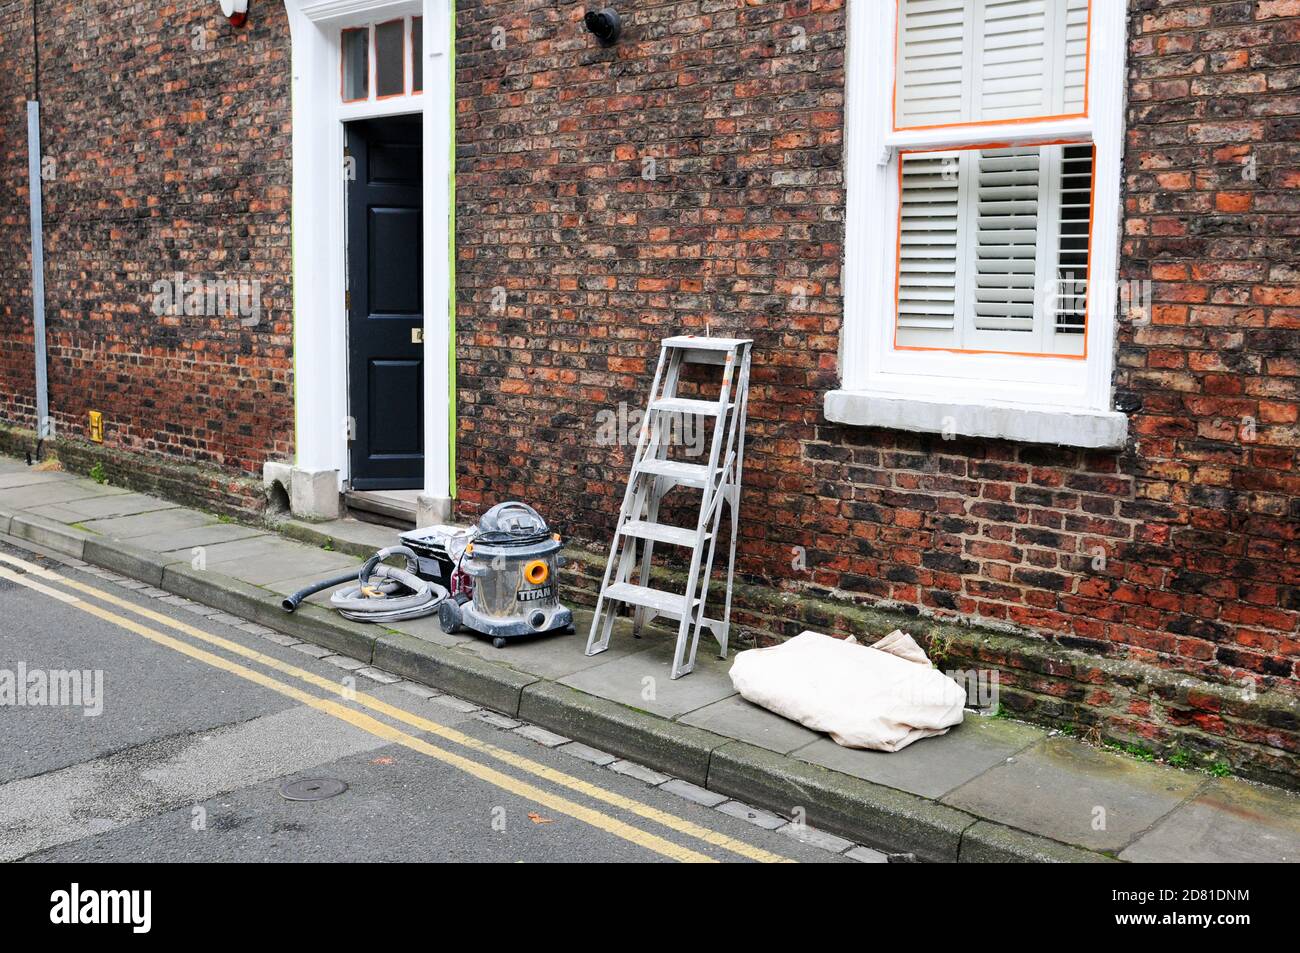 York,  UK, england, 24-10-2020, Exterior building with ladder leaning against the wall and hoover and dust sheet on pavement Stock Photo